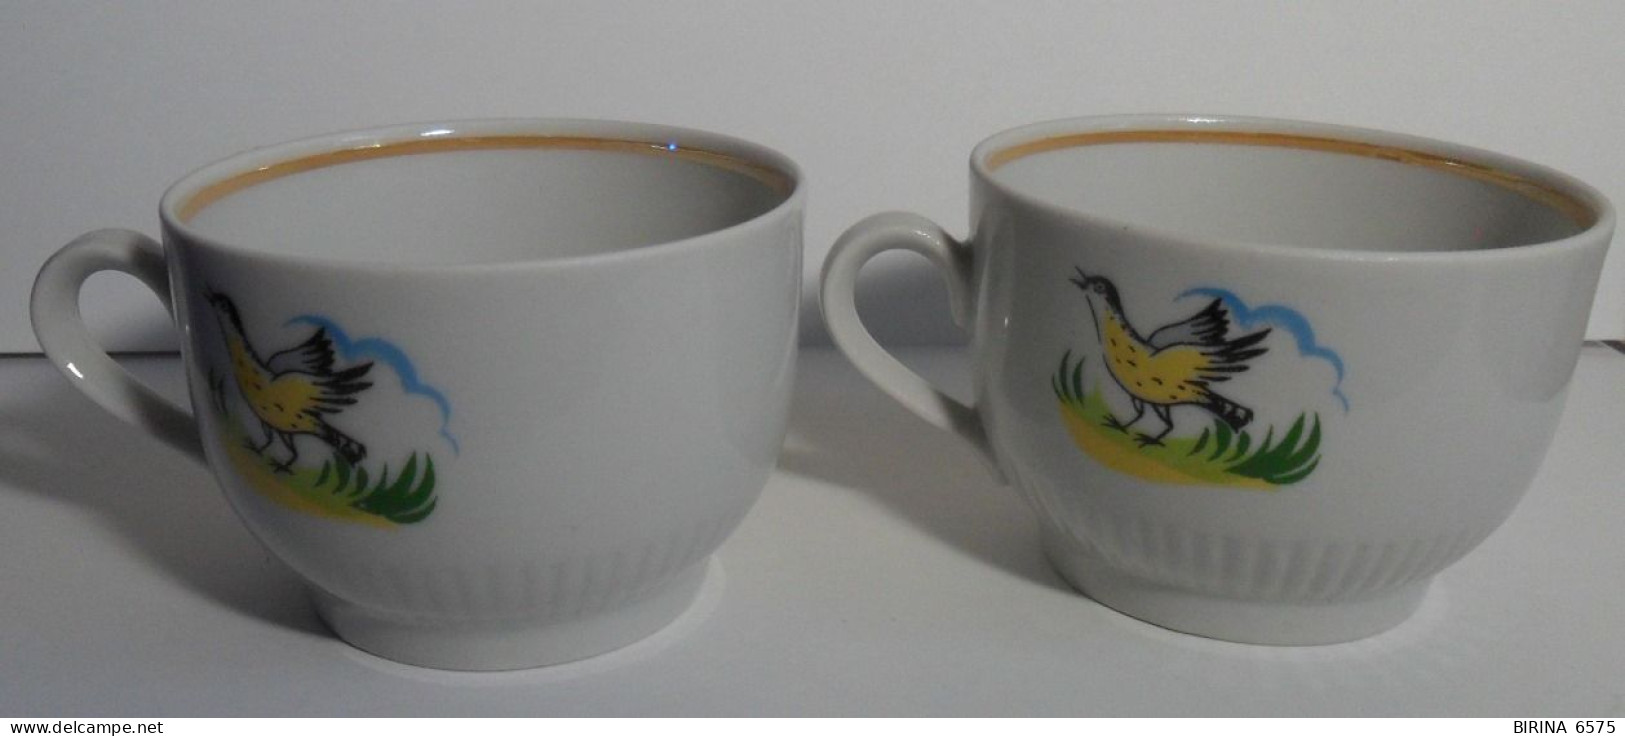 A Cup. The USSR. THE BRAND. PORCELAIN FACTORY PROLETARIAN. Lodge. Birdie. ONE LOT. - 11-52-i - Tasses